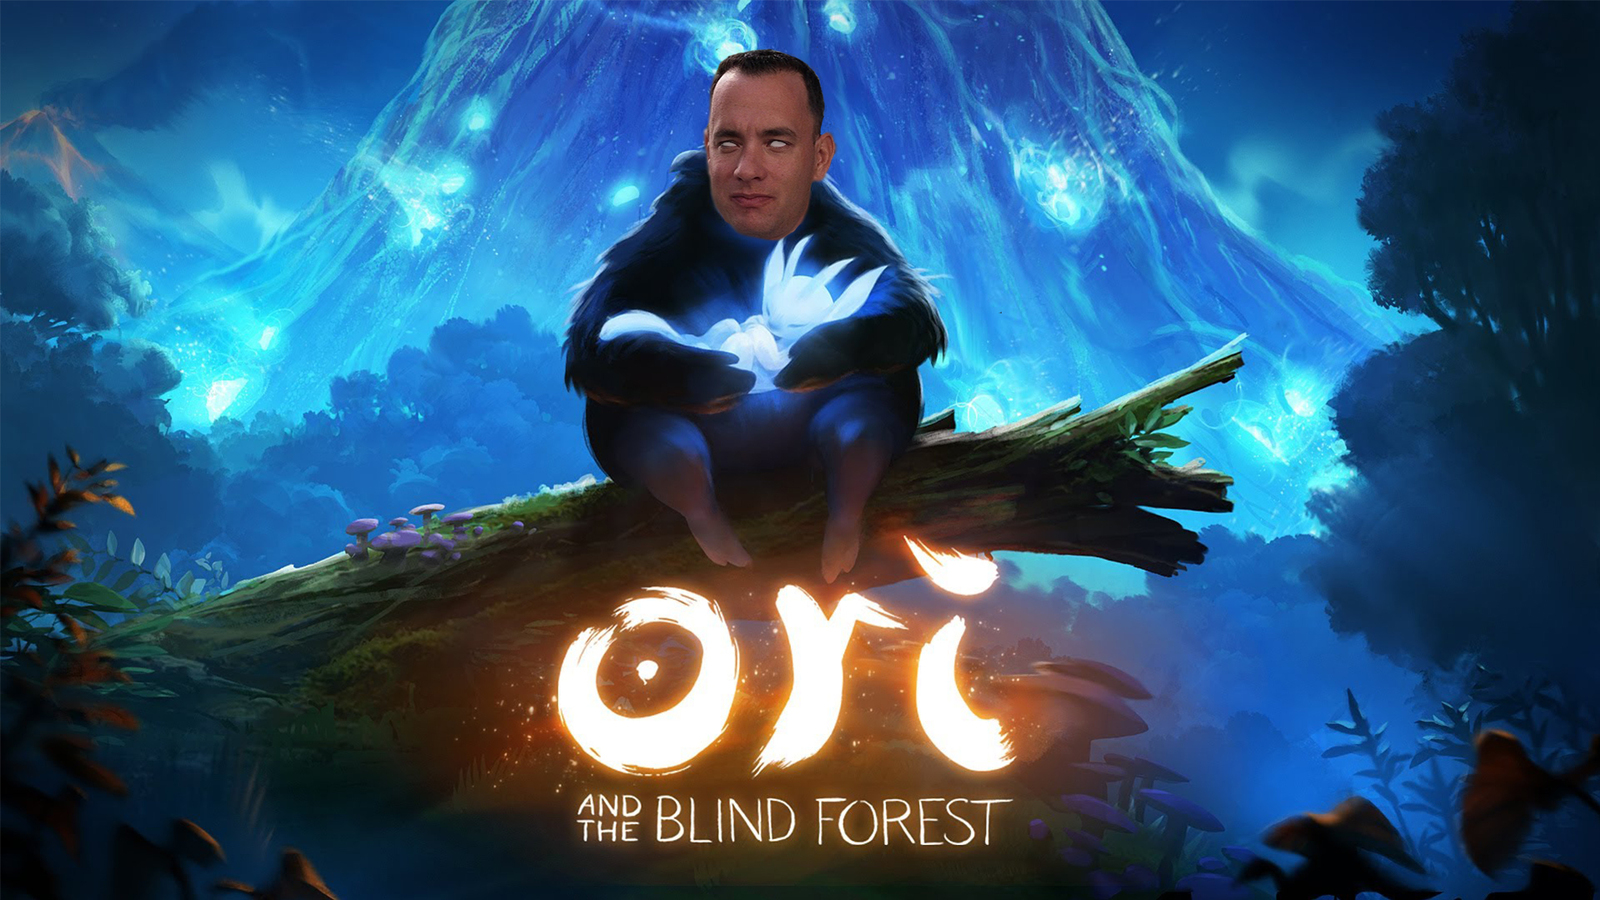 Ori and the blind forest - Orient and the blind forest, Crossover, Photoshop master, Crossover